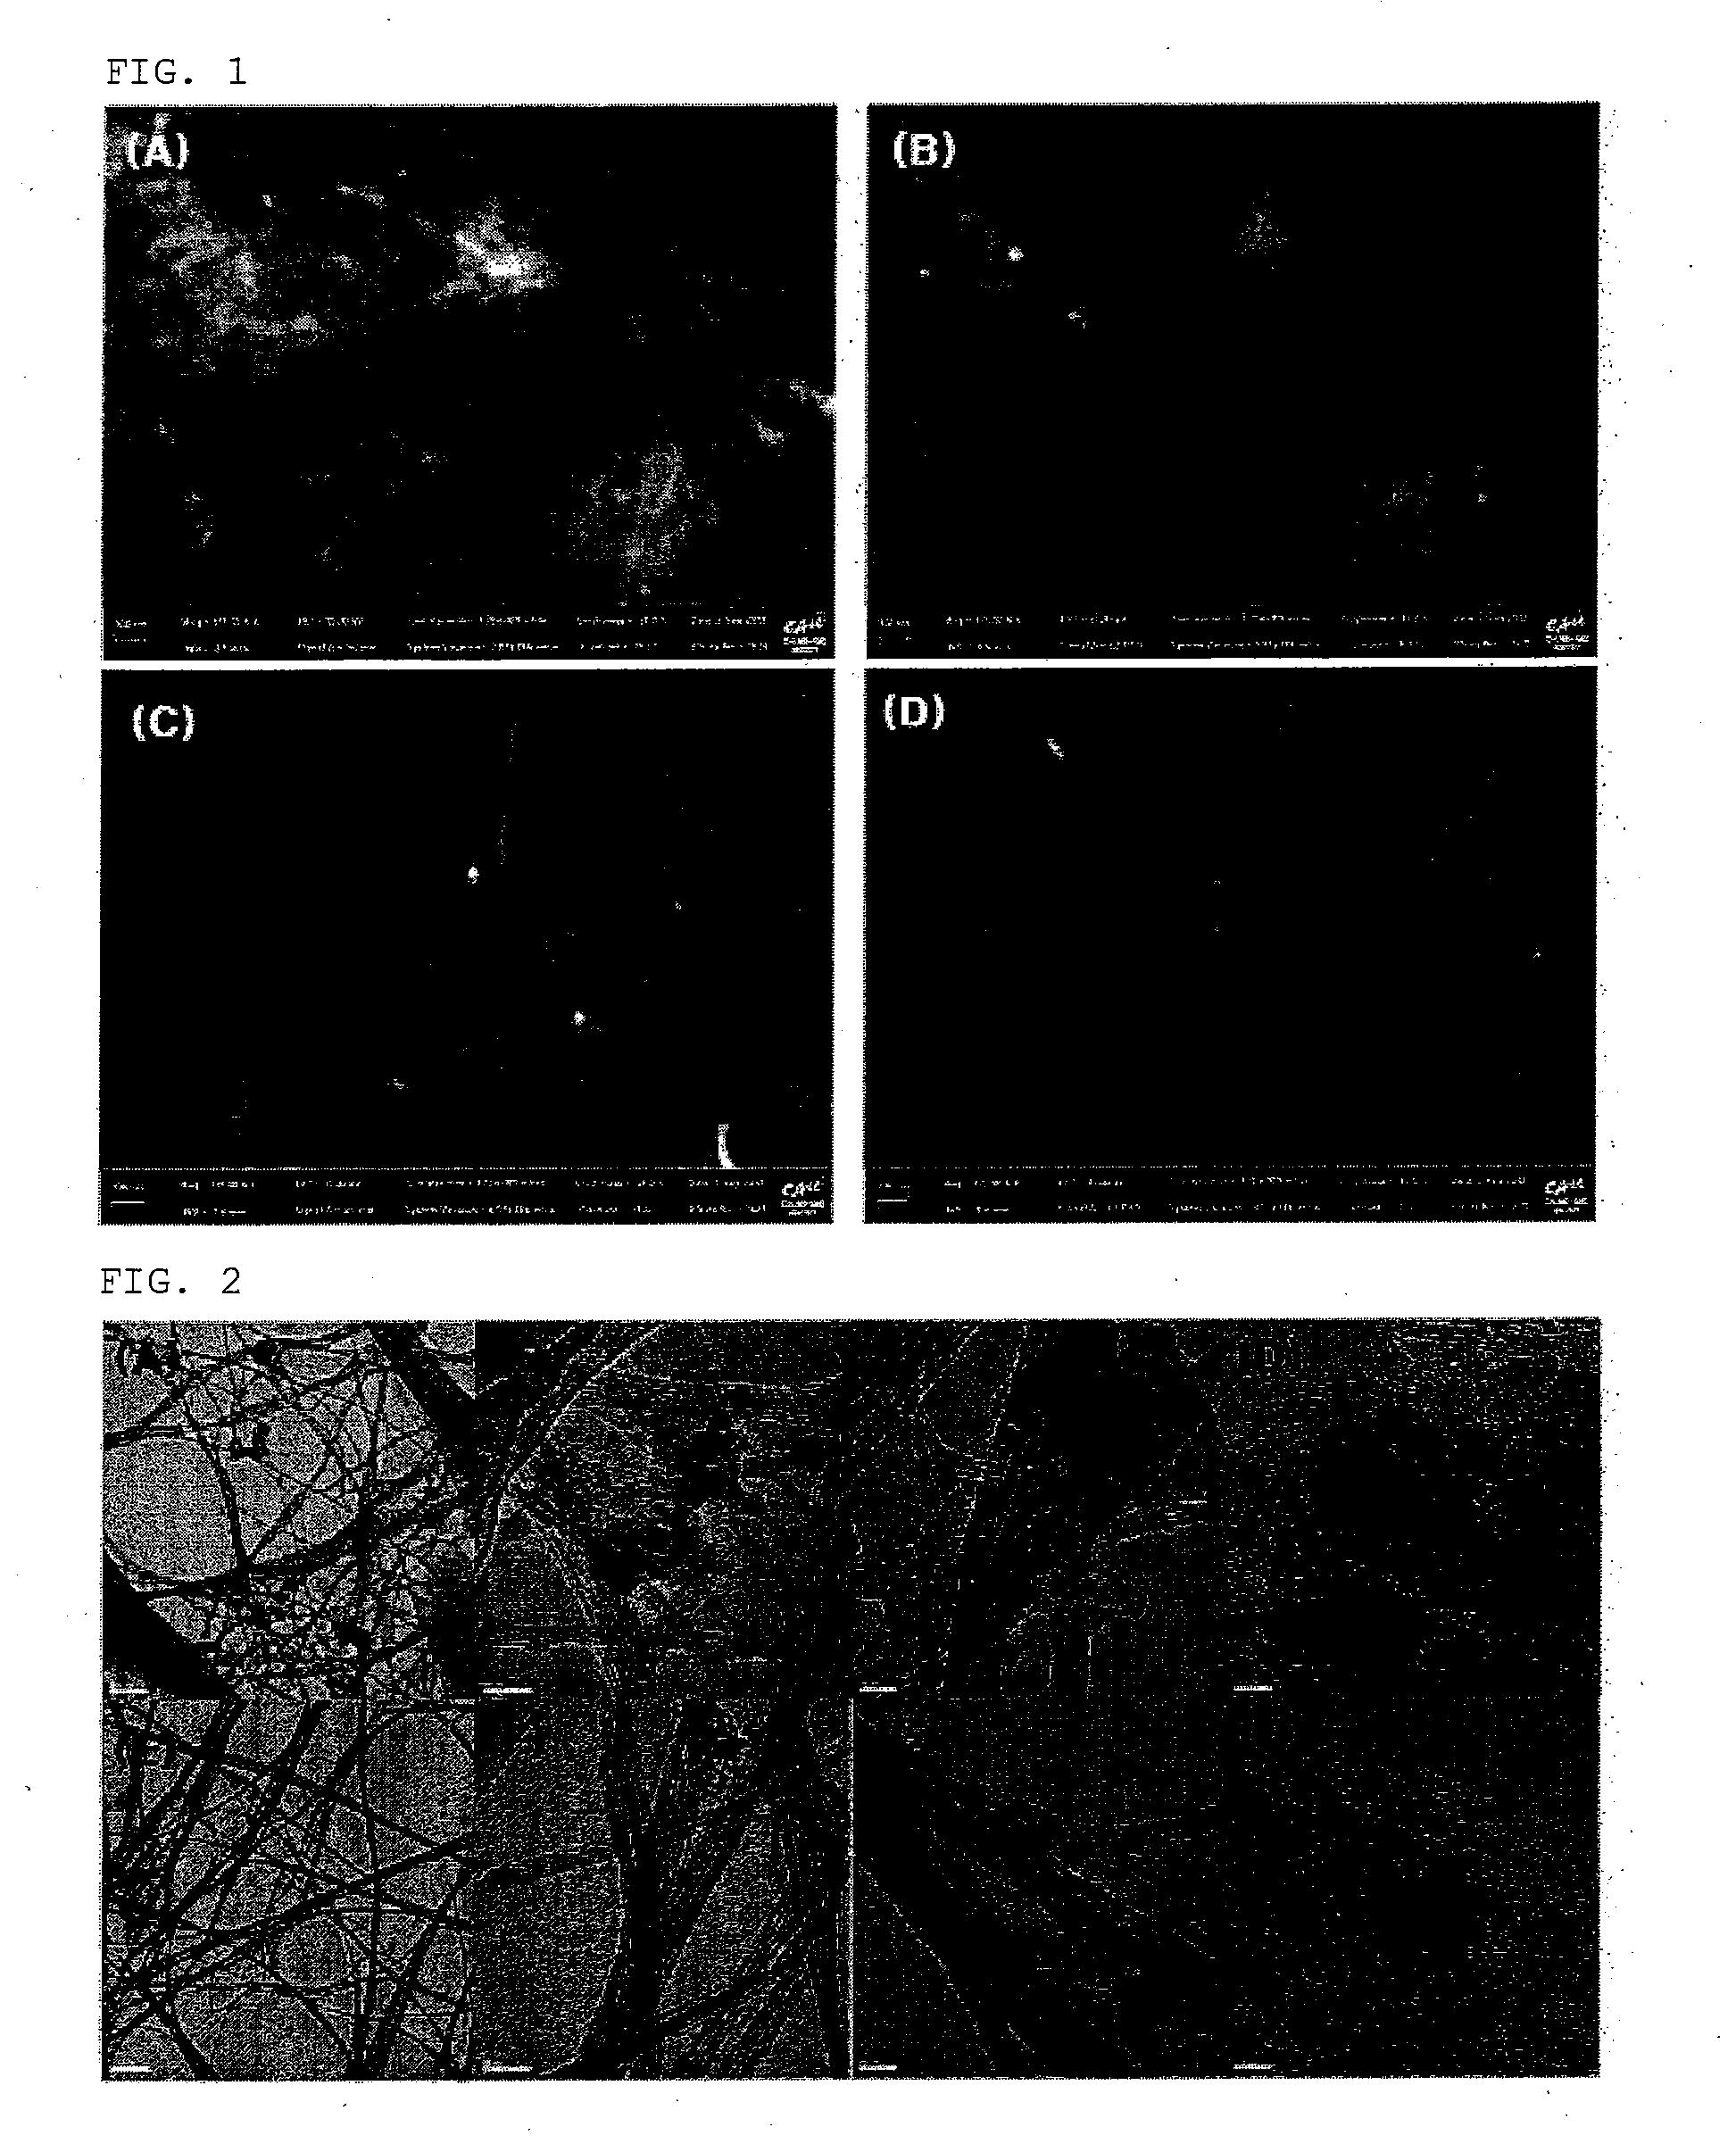 Method for Preparing Carbon Nanotube Fibers with Improved Spinning Properties Using Surfactant